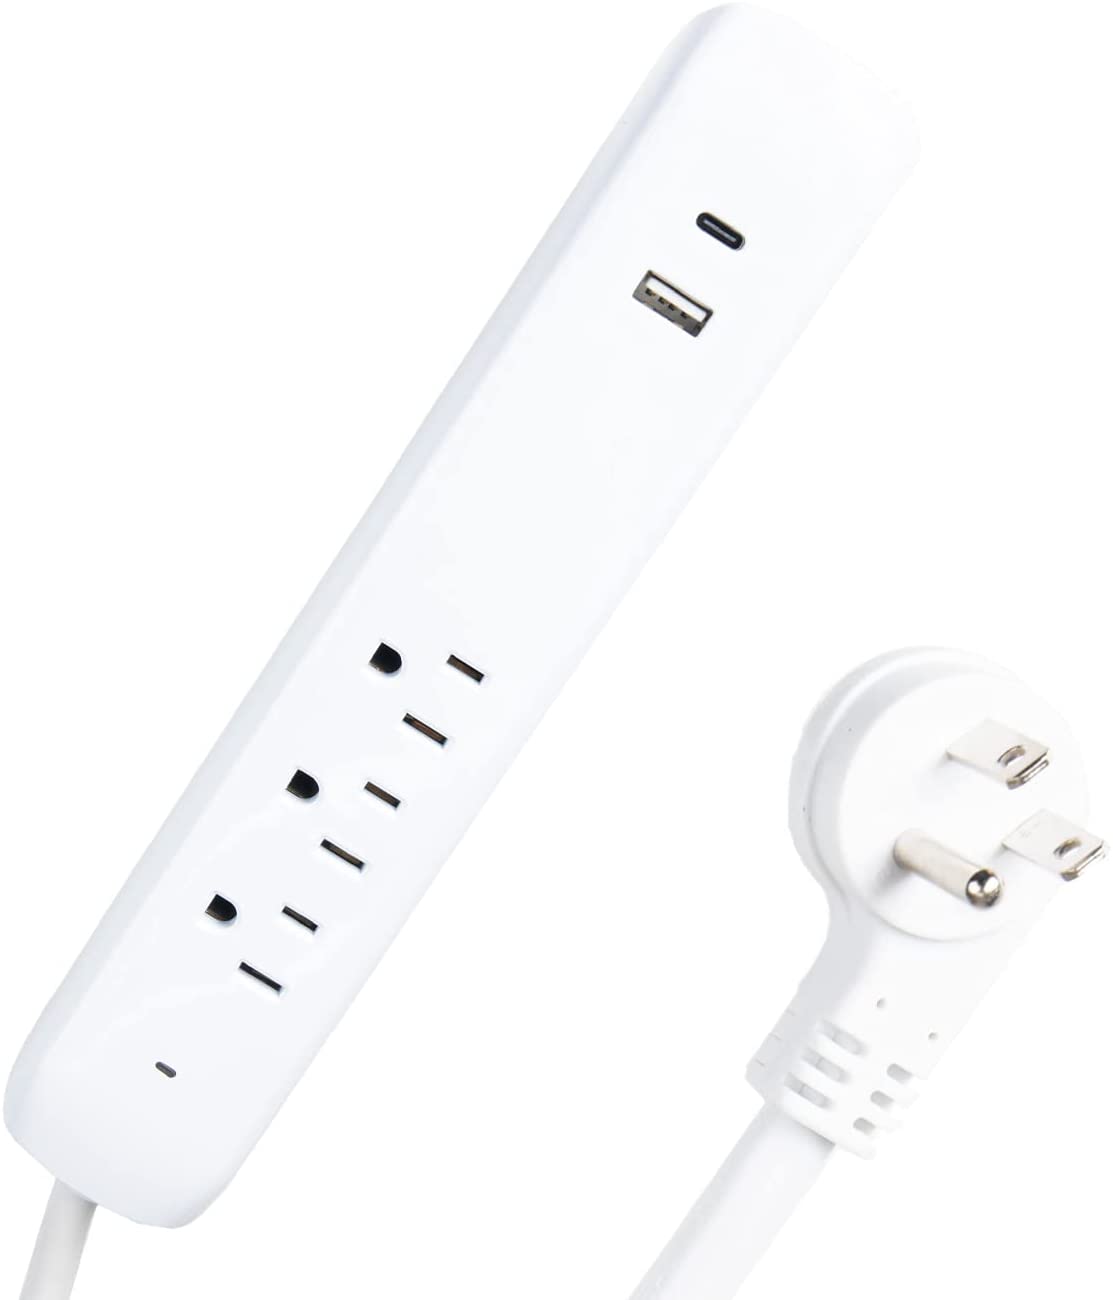 Surge Protector Power Strip with 2 USB Ports (1 USB A, 1 USB C), 3 Electrical Outlets & 6 Ft White Extension Cord, 13A/1625W, ETL Listed